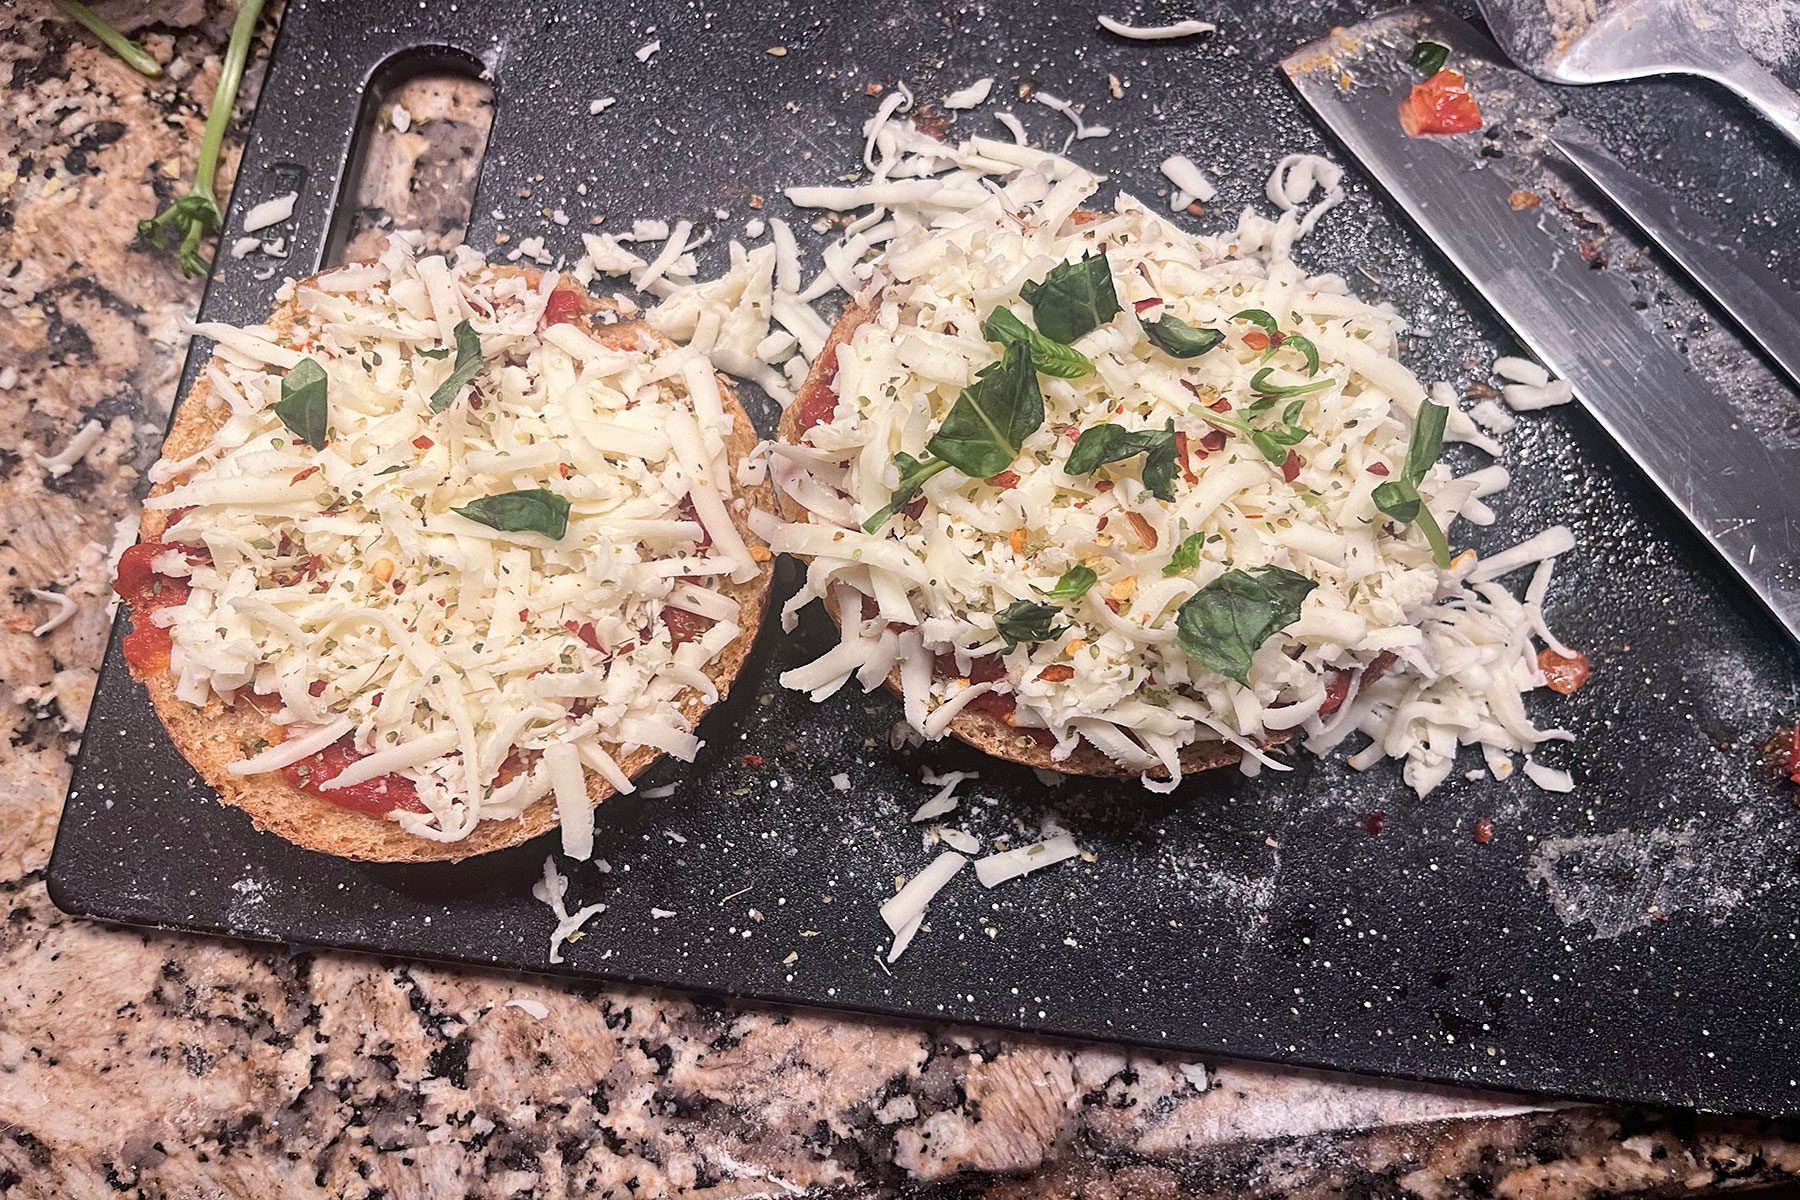 Uncooked Pizza Bagels ready to be baked